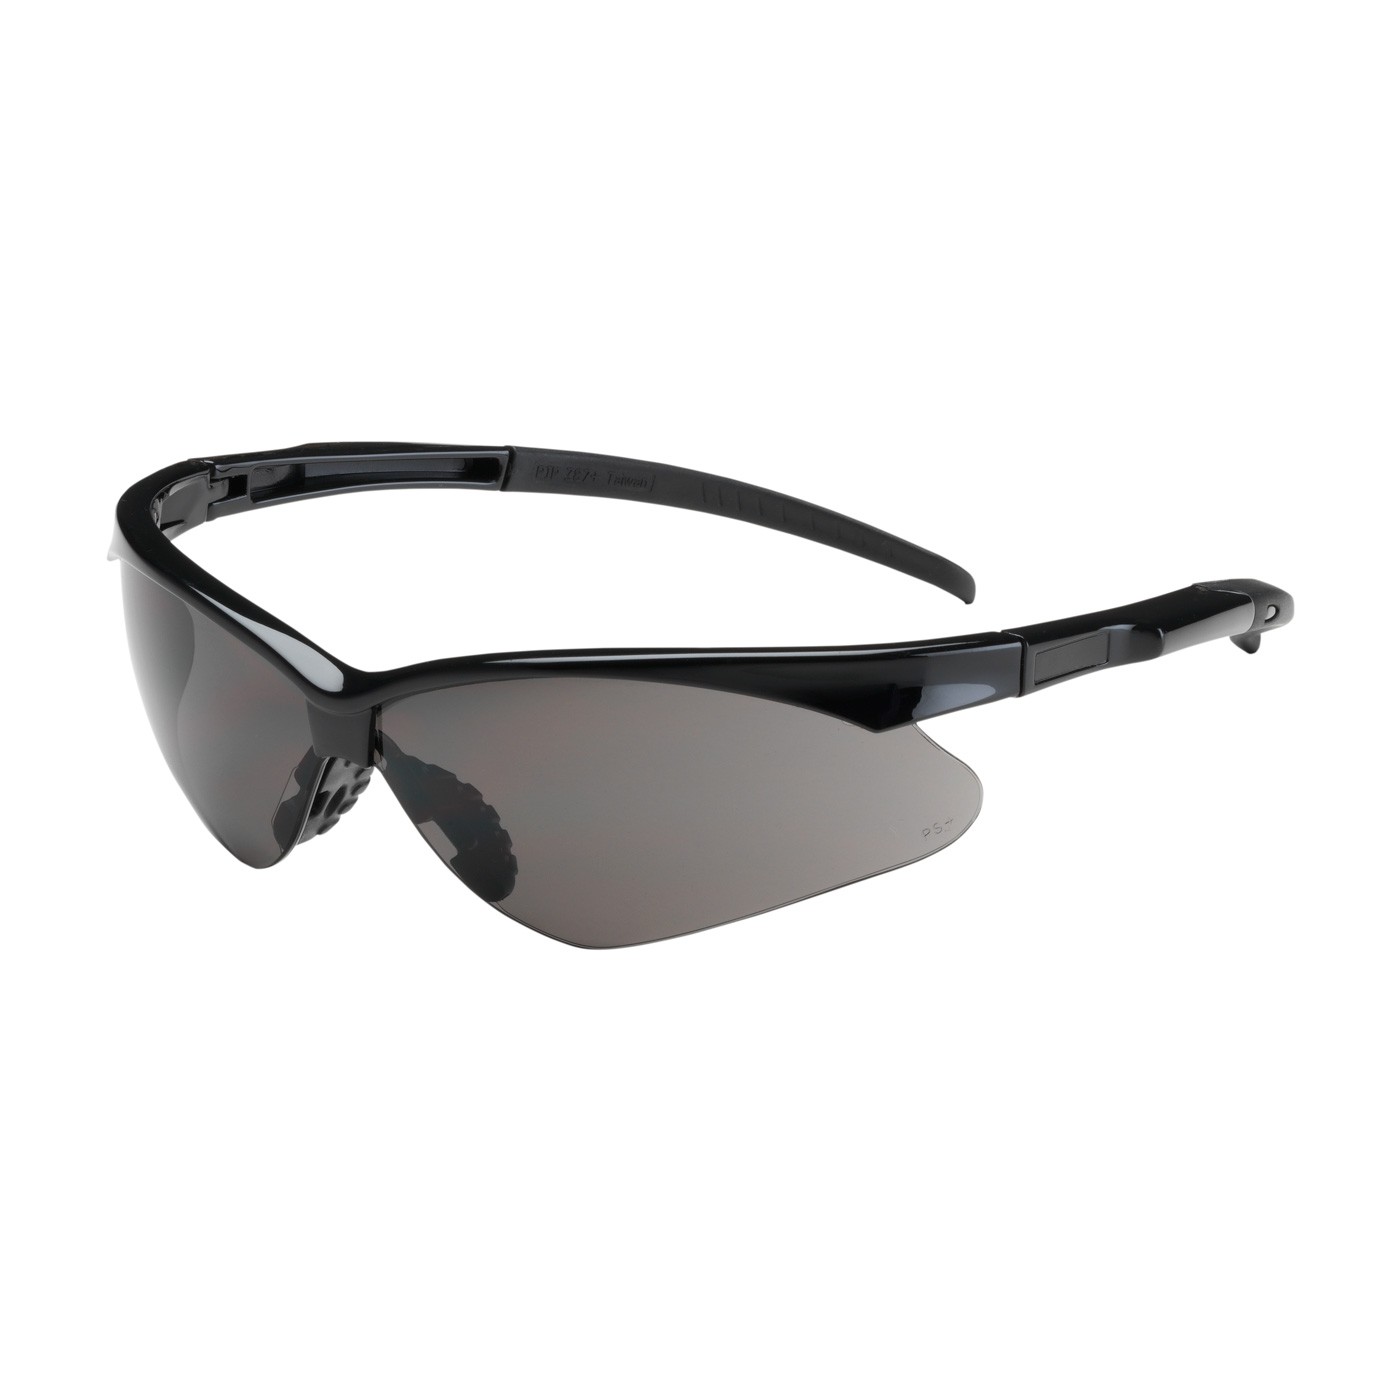 Adversary™ Semi-Rimless Safety Glasses with Black Frame, Gray Lens and Anti-Scratch / Anti-Fog Coating  (#250-28-0021)